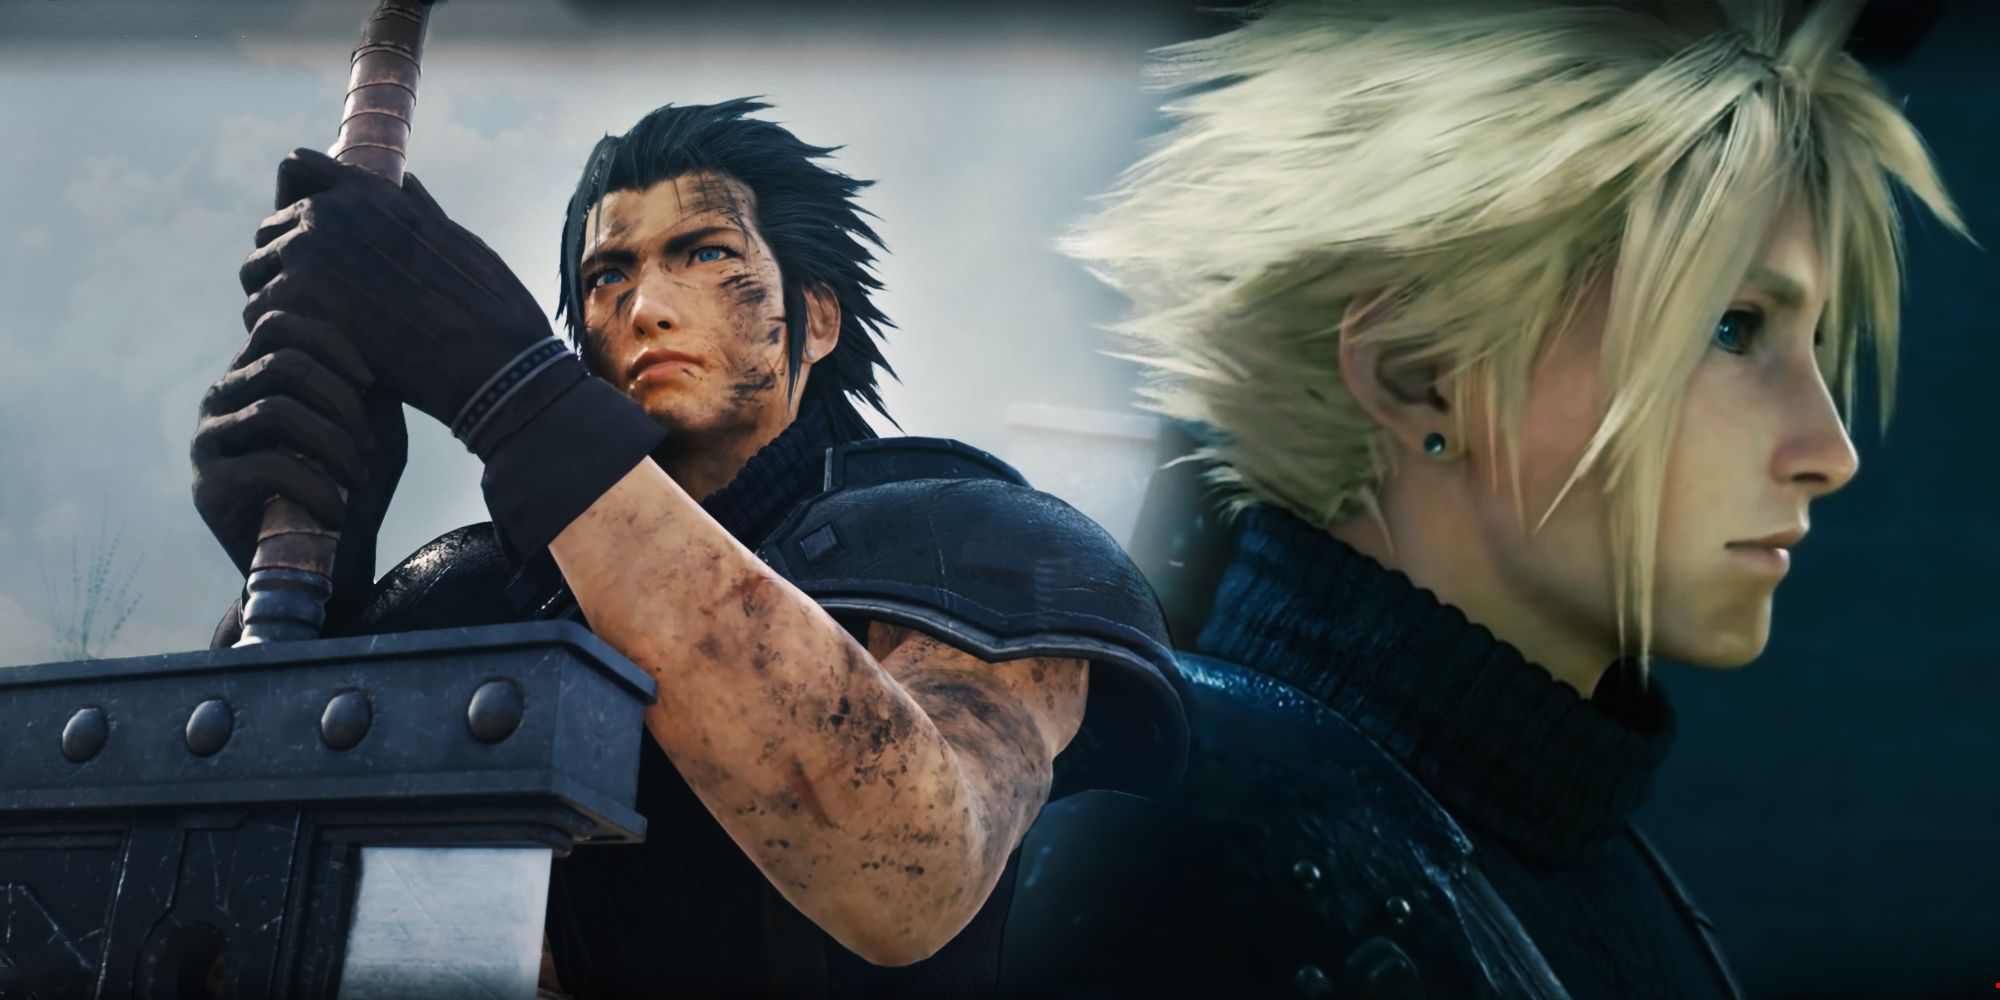 Zack and Cloud in FF7 Remake with Zack holding the Buster Sword.